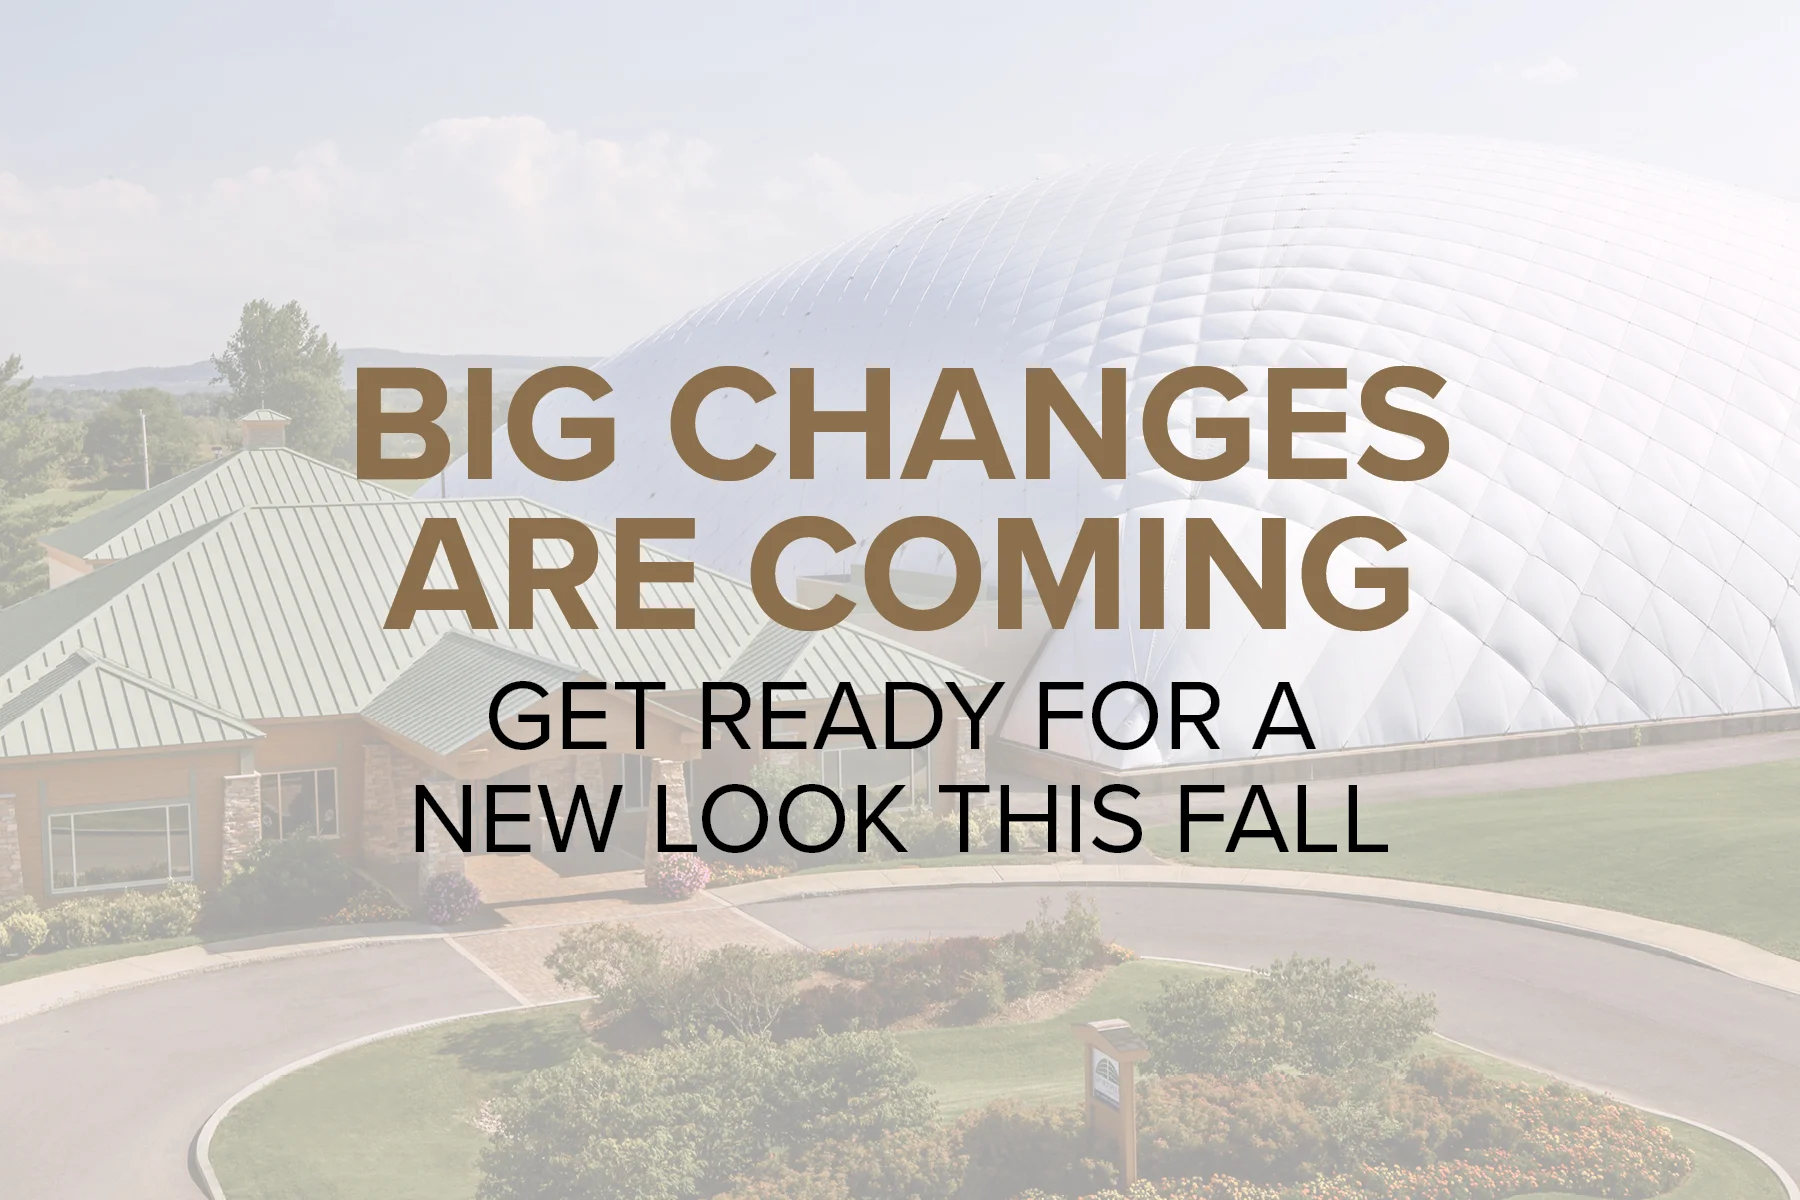 big changes are coming, get ready for a new look this fall